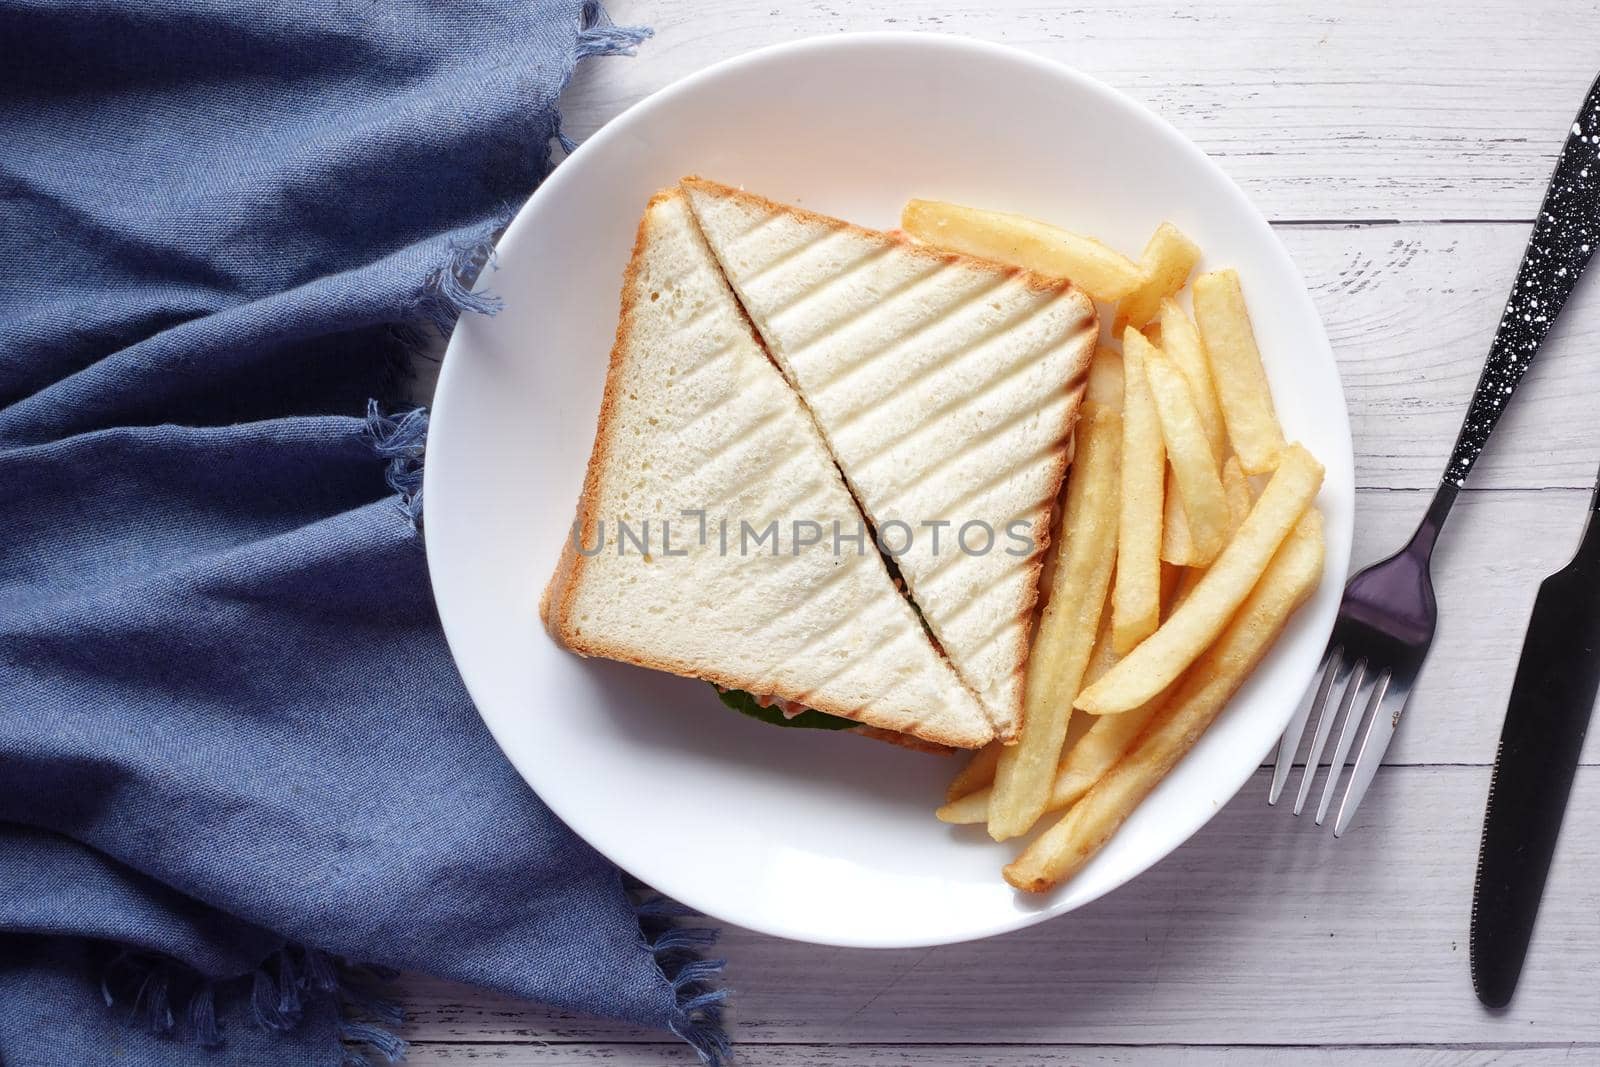 egg sandwich and chips on plate close up .